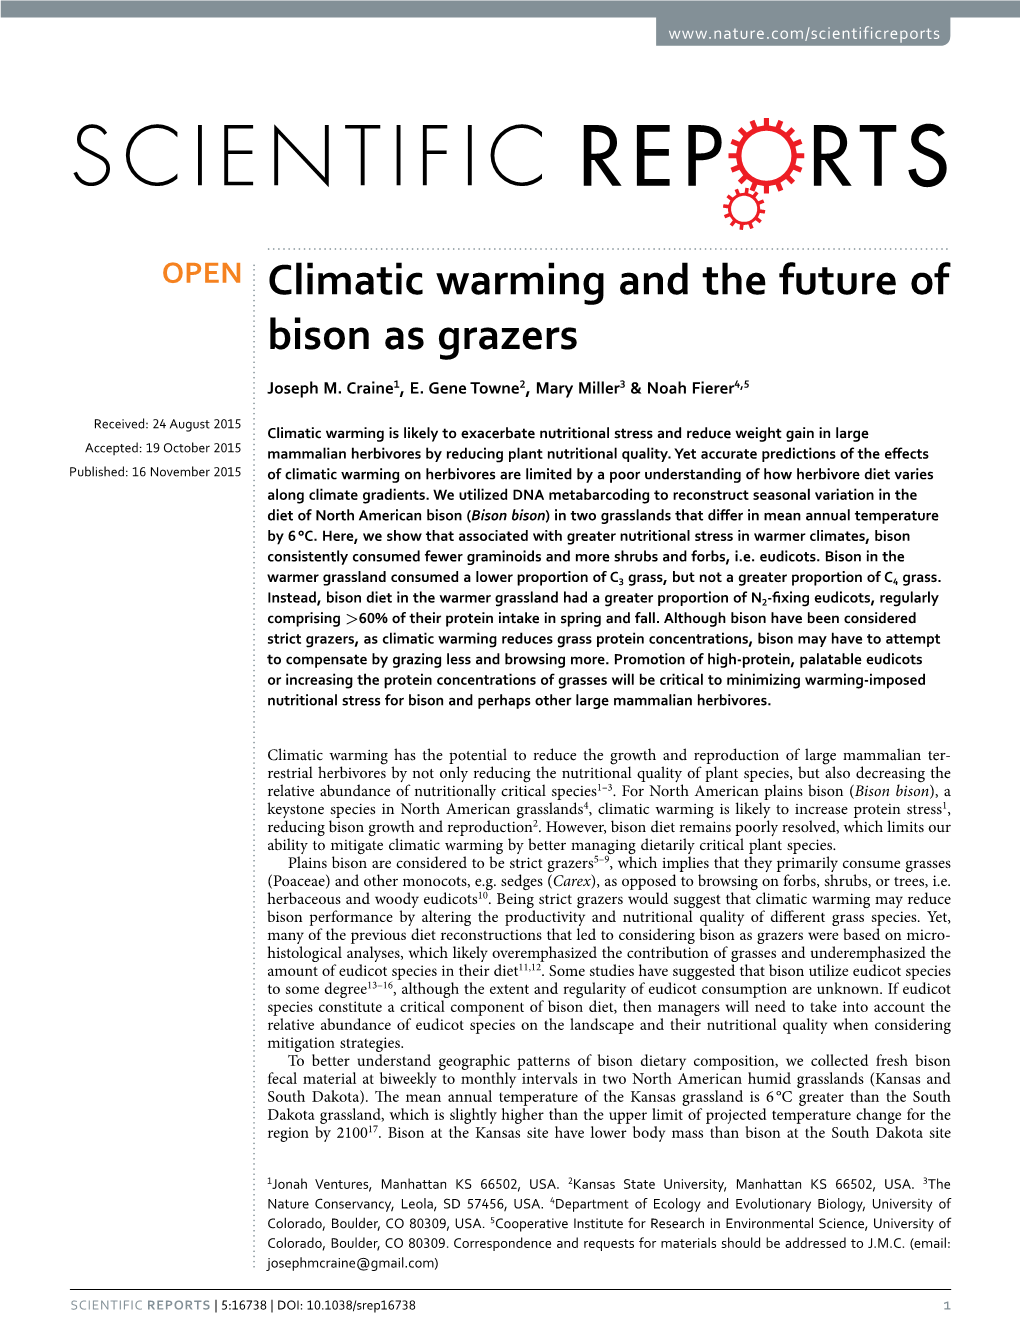 Climatic Warming and the Future of Bison As Grazers